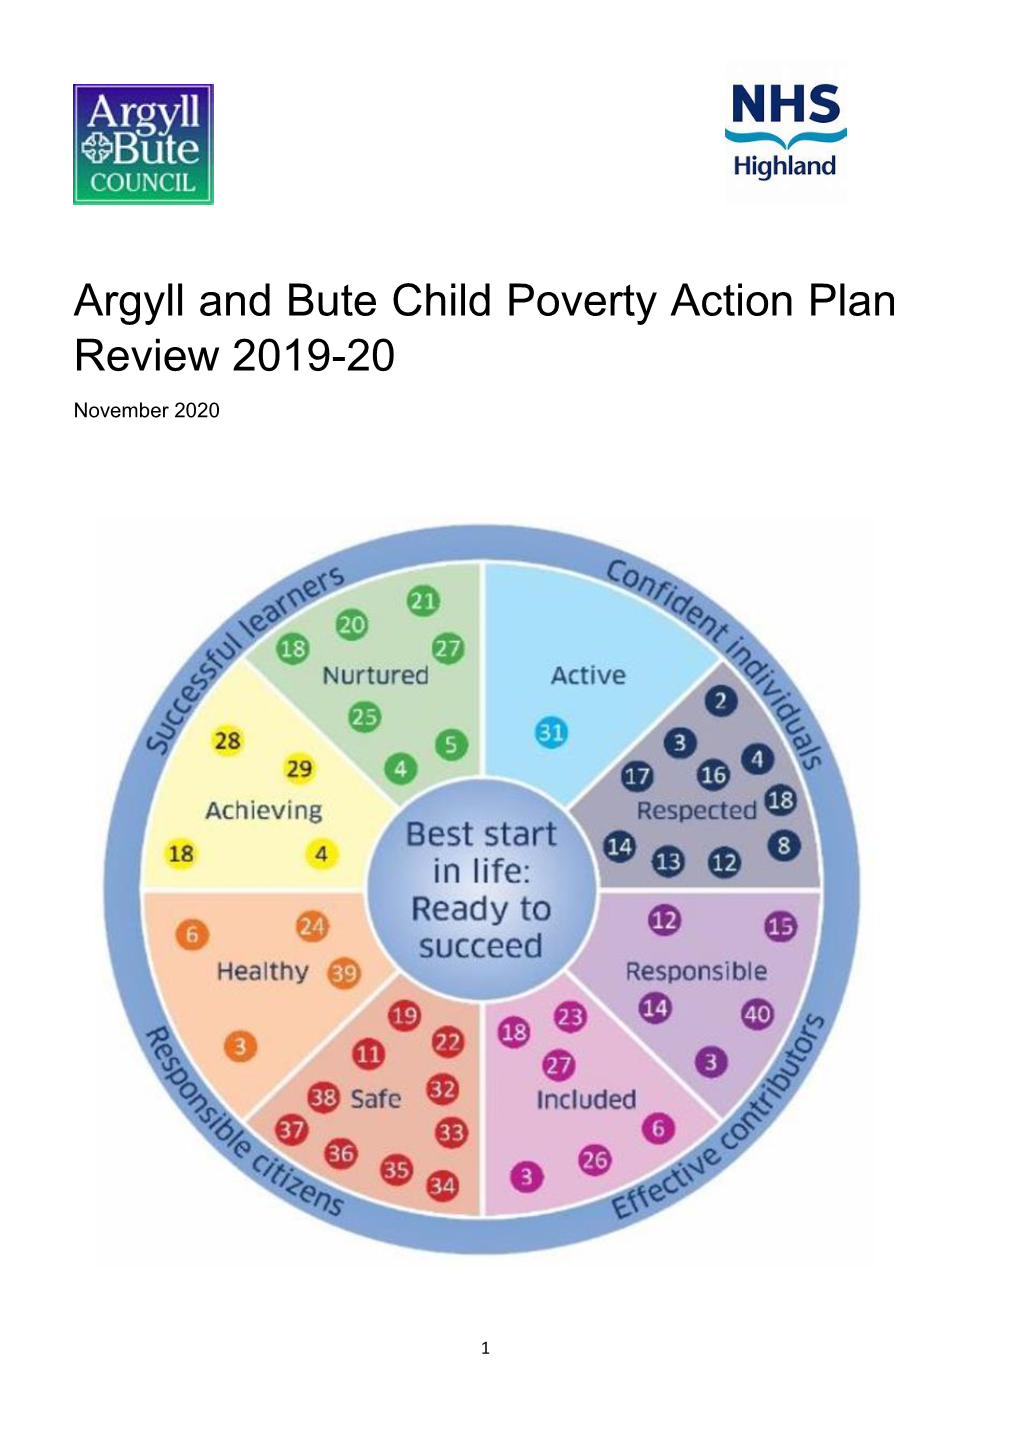 Argyll and Bute Child Poverty Action Plan Review 2019-20